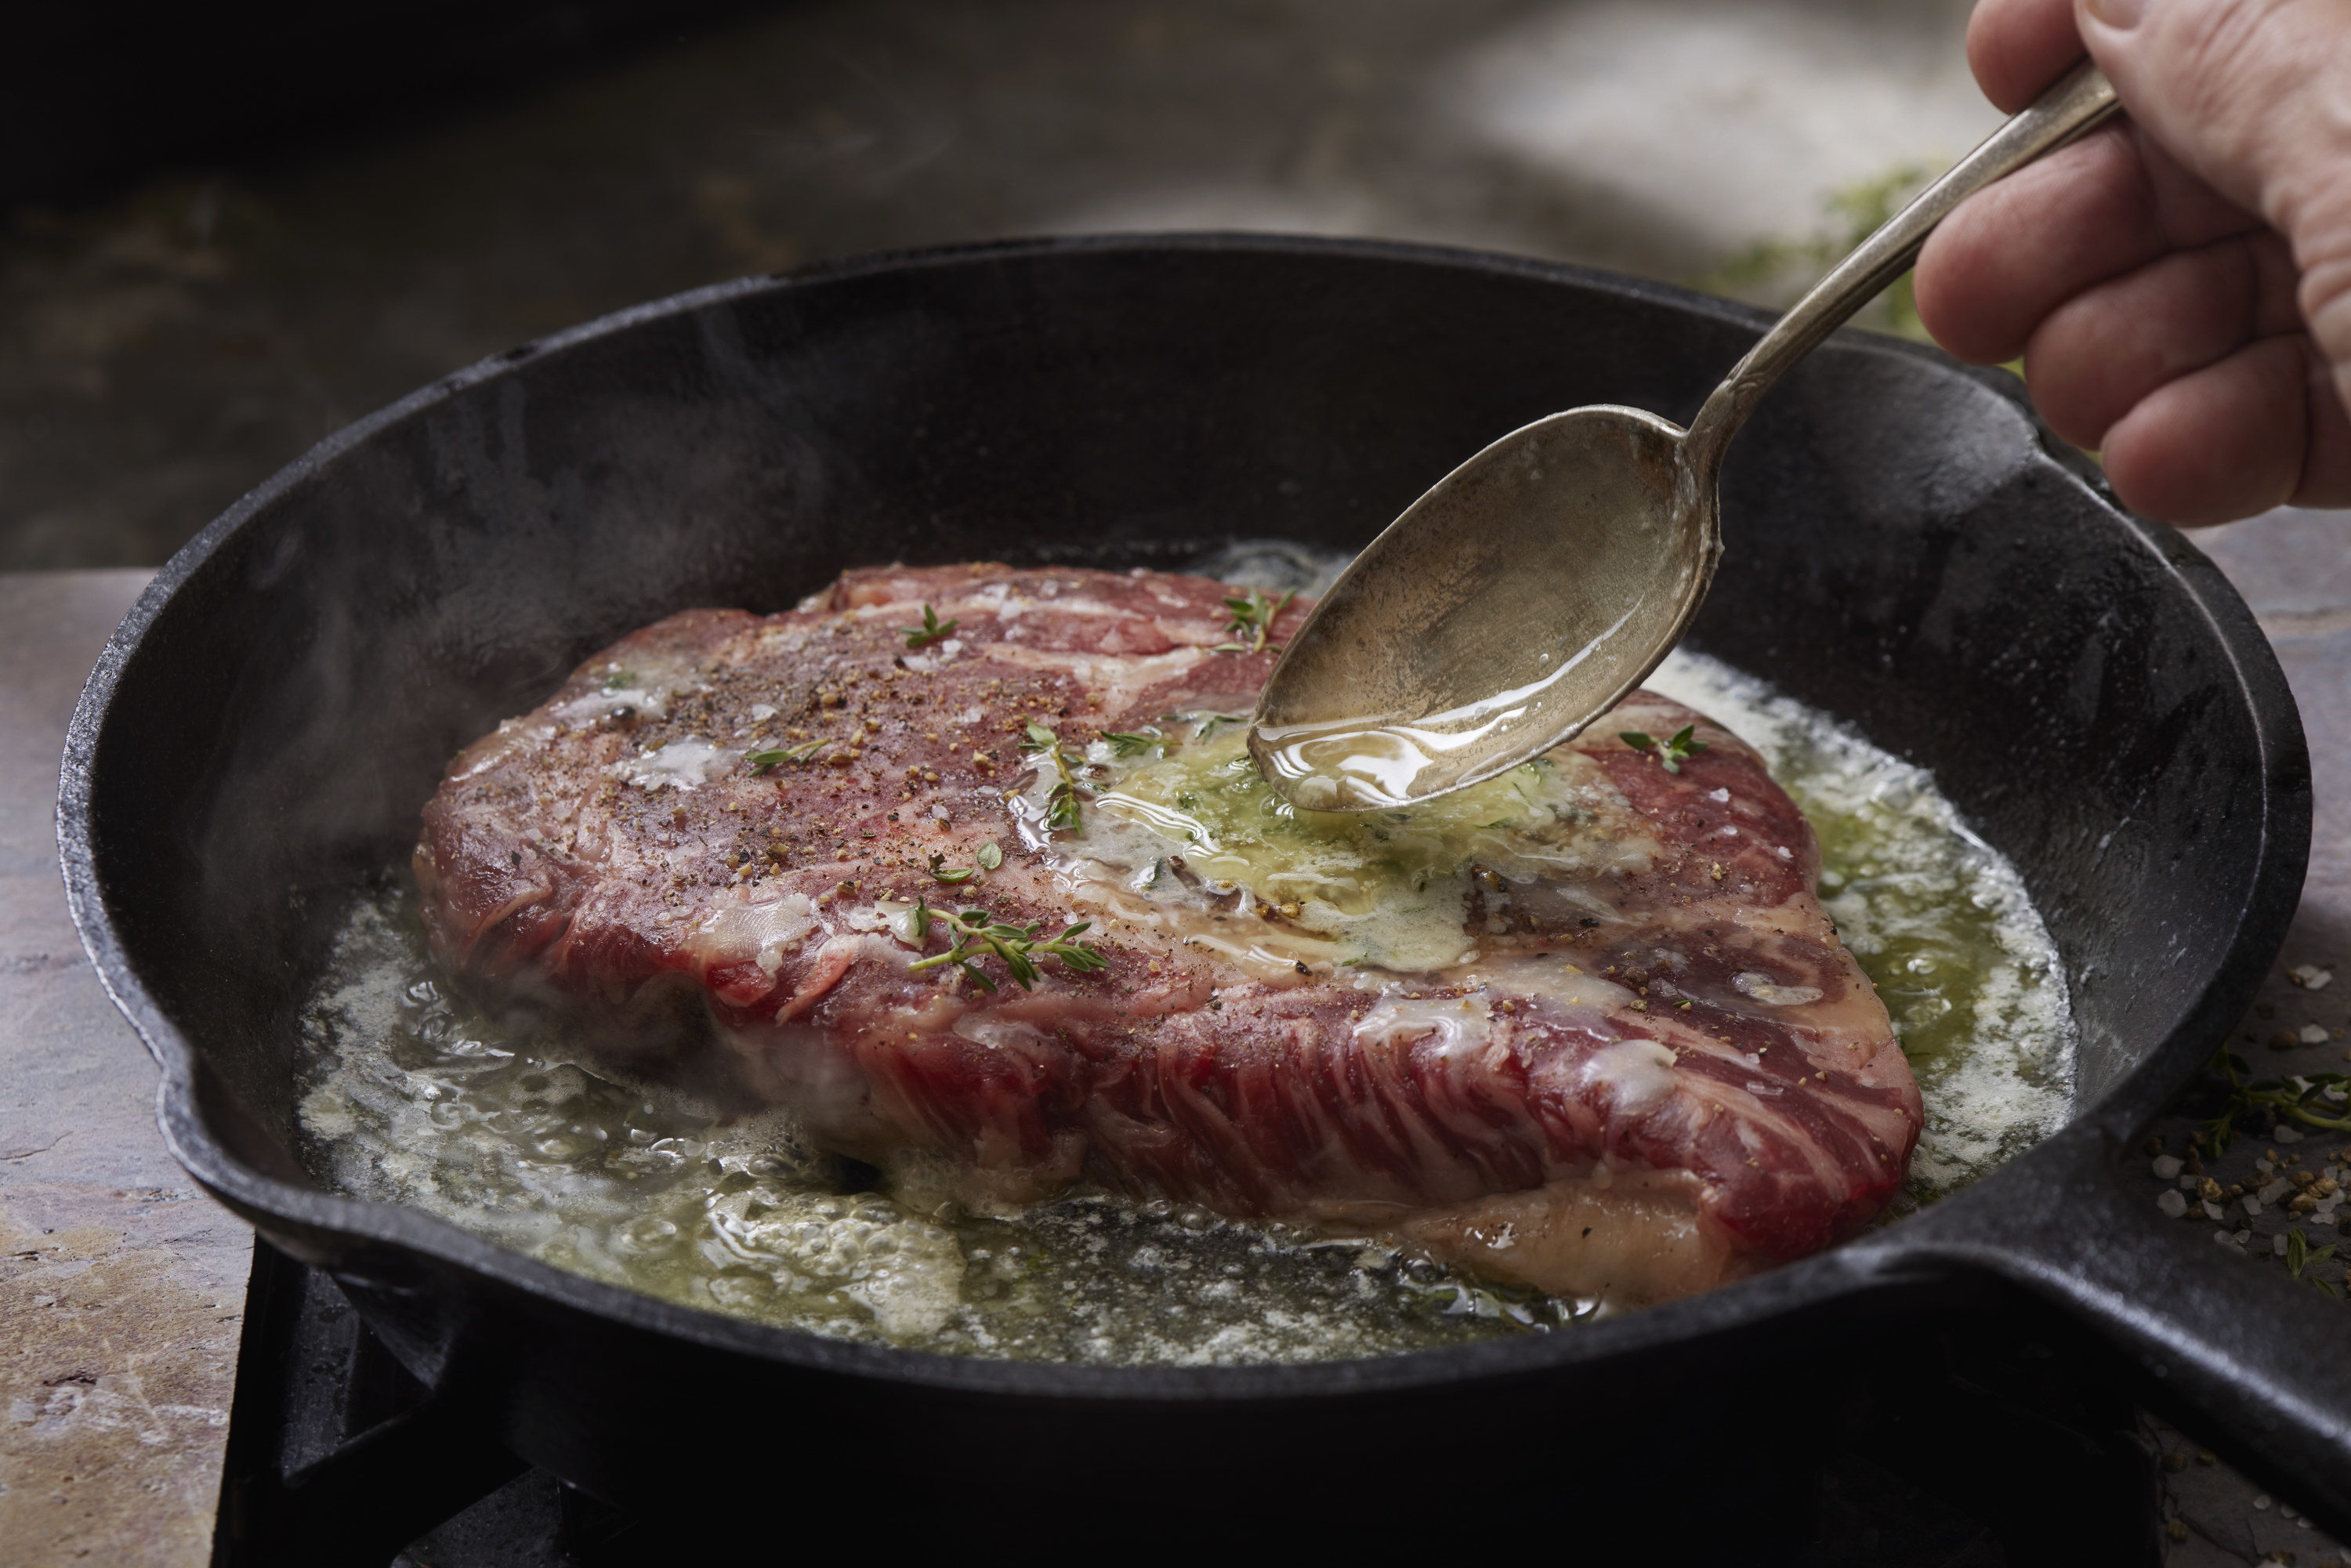 beef steak cooking in a pan with butter and herbs